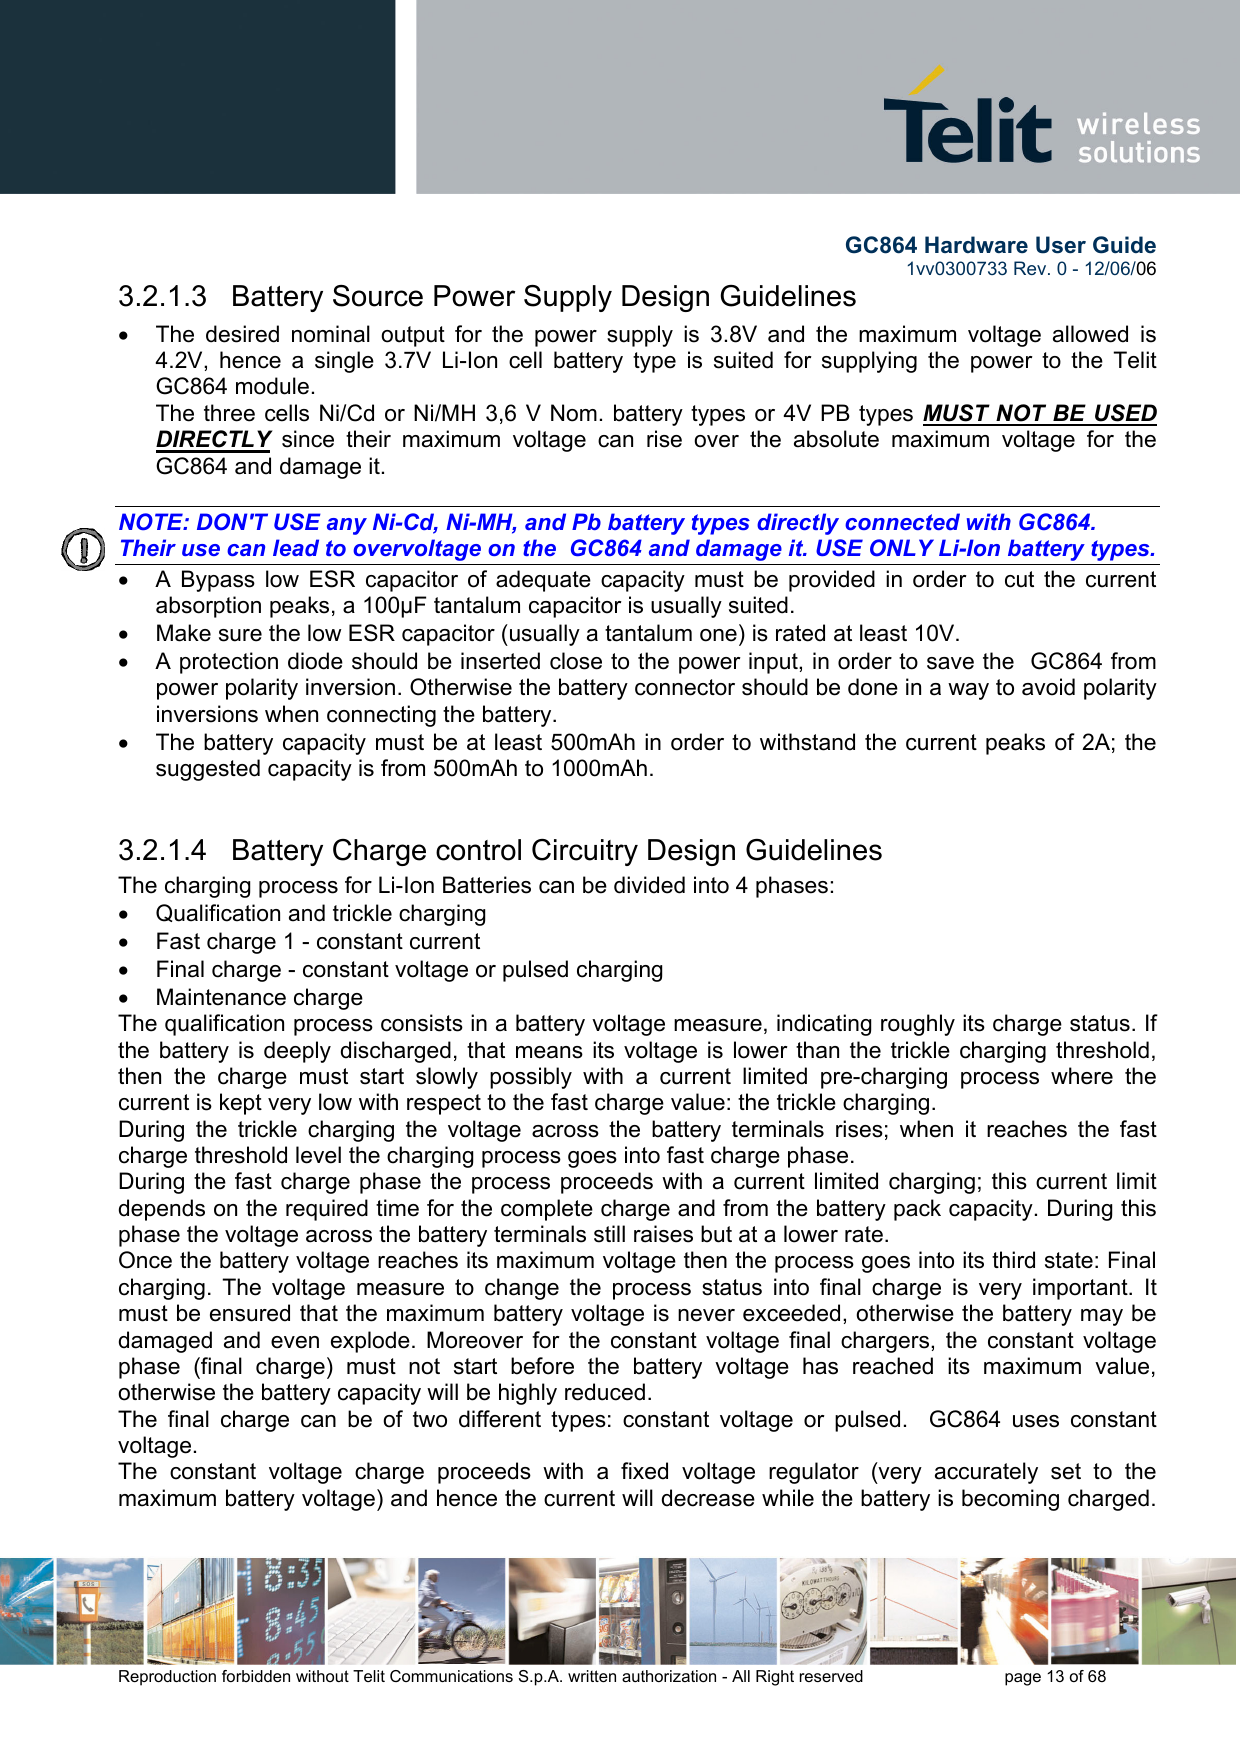        GC864 Hardware User Guide  1vv0300733 Rev. 0 - 12/06/06  Reproduction forbidden without Telit Communications S.p.A. written authorization - All Right reserved    page 13 of 68  3.2.1.3   Battery Source Power Supply Design Guidelines •  The desired nominal output for the power supply is 3.8V and the maximum voltage allowed is 4.2V, hence a single 3.7V Li-Ion cell battery type is suited for supplying the power to the Telit GC864 module. The three cells Ni/Cd or Ni/MH 3,6 V Nom. battery types or 4V PB types MUST NOT BE USED DIRECTLY since their maximum voltage can rise over the absolute maximum voltage for the GC864 and damage it.  NOTE: DON&apos;T USE any Ni-Cd, Ni-MH, and Pb battery types directly connected with GC864. Their use can lead to overvoltage on the  GC864 and damage it. USE ONLY Li-Ion battery types. •  A Bypass low ESR capacitor of adequate capacity must be provided in order to cut the current absorption peaks, a 100μF tantalum capacitor is usually suited. •  Make sure the low ESR capacitor (usually a tantalum one) is rated at least 10V. •  A protection diode should be inserted close to the power input, in order to save the  GC864 from power polarity inversion. Otherwise the battery connector should be done in a way to avoid polarity inversions when connecting the battery. •  The battery capacity must be at least 500mAh in order to withstand the current peaks of 2A; the suggested capacity is from 500mAh to 1000mAh.  3.2.1.4   Battery Charge control Circuitry Design Guidelines The charging process for Li-Ion Batteries can be divided into 4 phases: •  Qualification and trickle charging •  Fast charge 1 - constant current •  Final charge - constant voltage or pulsed charging •  Maintenance charge  The qualification process consists in a battery voltage measure, indicating roughly its charge status. If the battery is deeply discharged, that means its voltage is lower than the trickle charging threshold, then the charge must start slowly possibly with a current limited pre-charging process where the current is kept very low with respect to the fast charge value: the trickle charging. During the trickle charging the voltage across the battery terminals rises; when it reaches the fast charge threshold level the charging process goes into fast charge phase. During the fast charge phase the process proceeds with a current limited charging; this current limit depends on the required time for the complete charge and from the battery pack capacity. During this phase the voltage across the battery terminals still raises but at a lower rate. Once the battery voltage reaches its maximum voltage then the process goes into its third state: Final  charging. The voltage measure to change the process status into final charge is very important. It must be ensured that the maximum battery voltage is never exceeded, otherwise the battery may be damaged and even explode. Moreover for the constant voltage final chargers, the constant voltage phase (final charge) must not start before the battery voltage has reached its maximum value, otherwise the battery capacity will be highly reduced. The final charge can be of two different types: constant voltage or pulsed.  GC864 uses constant voltage. The constant voltage charge proceeds with a fixed voltage regulator (very accurately set to the maximum battery voltage) and hence the current will decrease while the battery is becoming charged. 